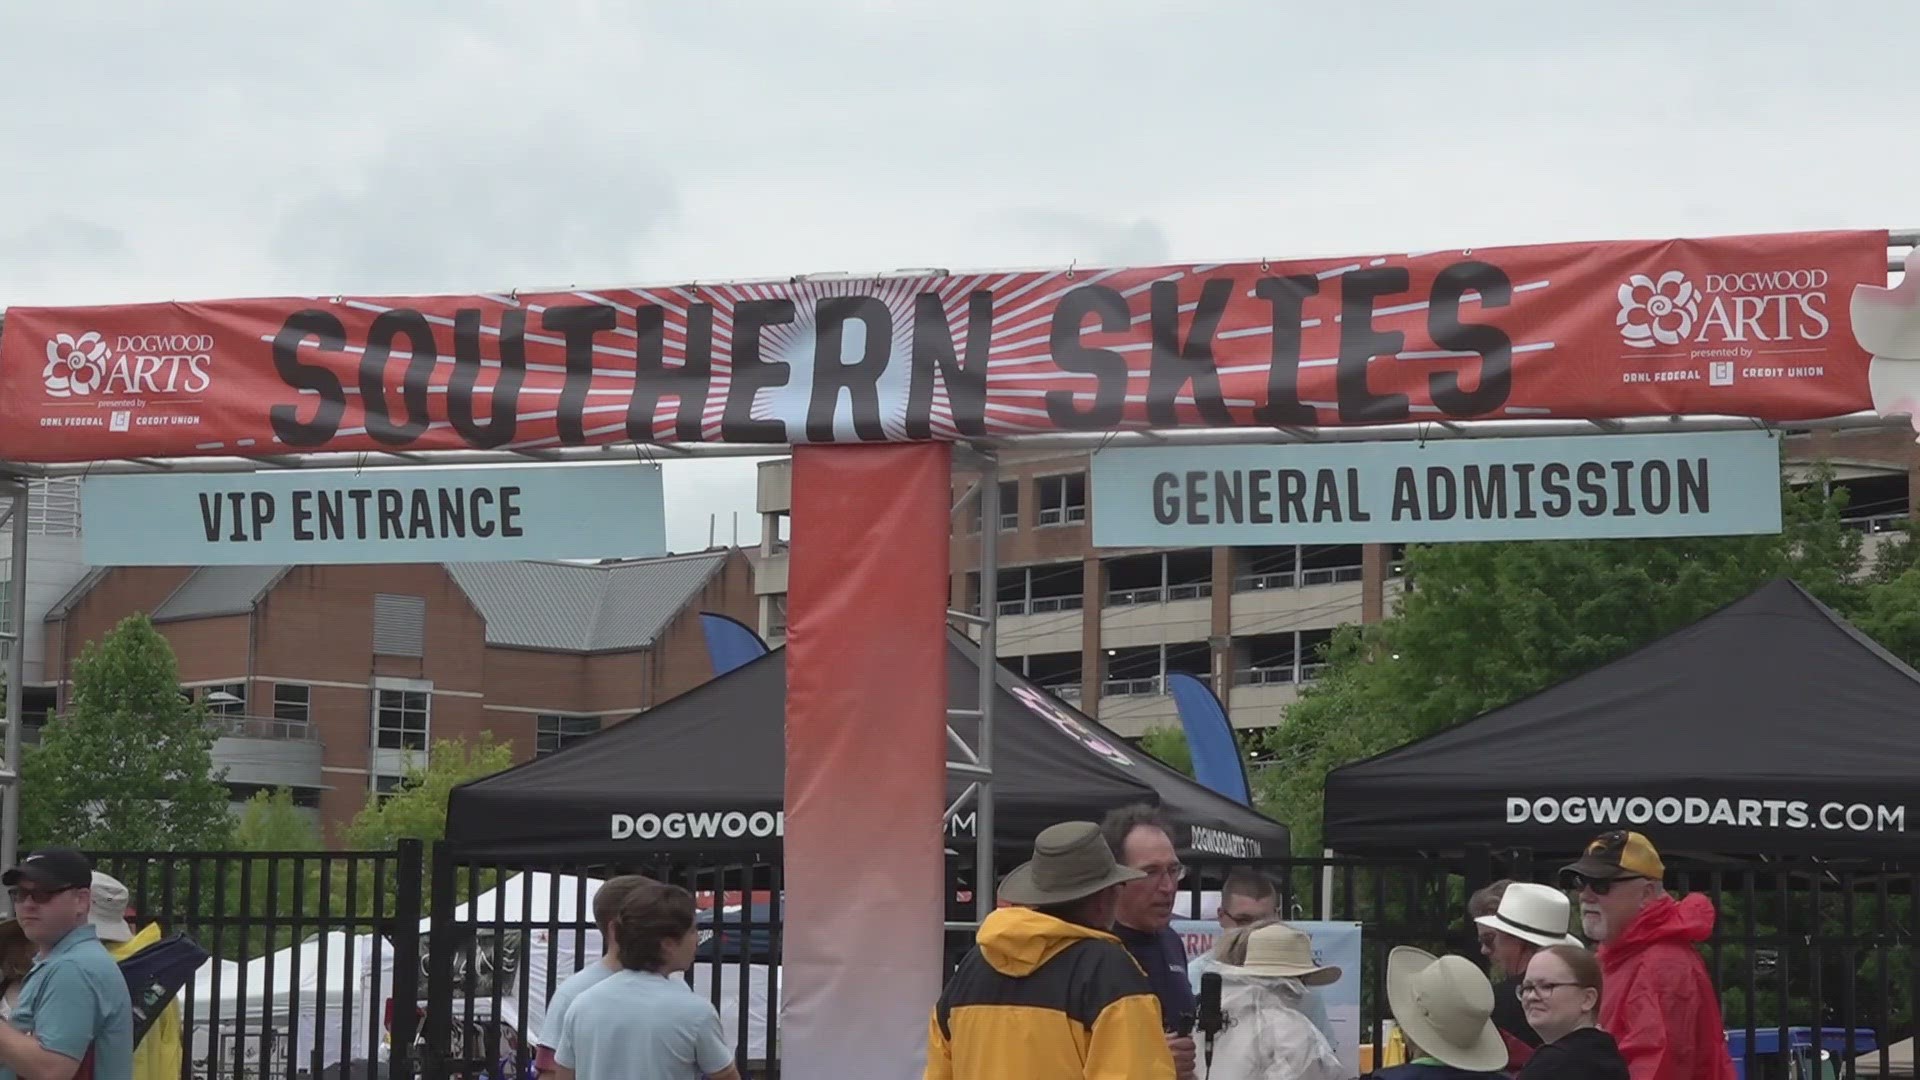 A springtime classic returned in Knoxville as the Southern Skies Music Festival took over the lawn of World's Fair Park.